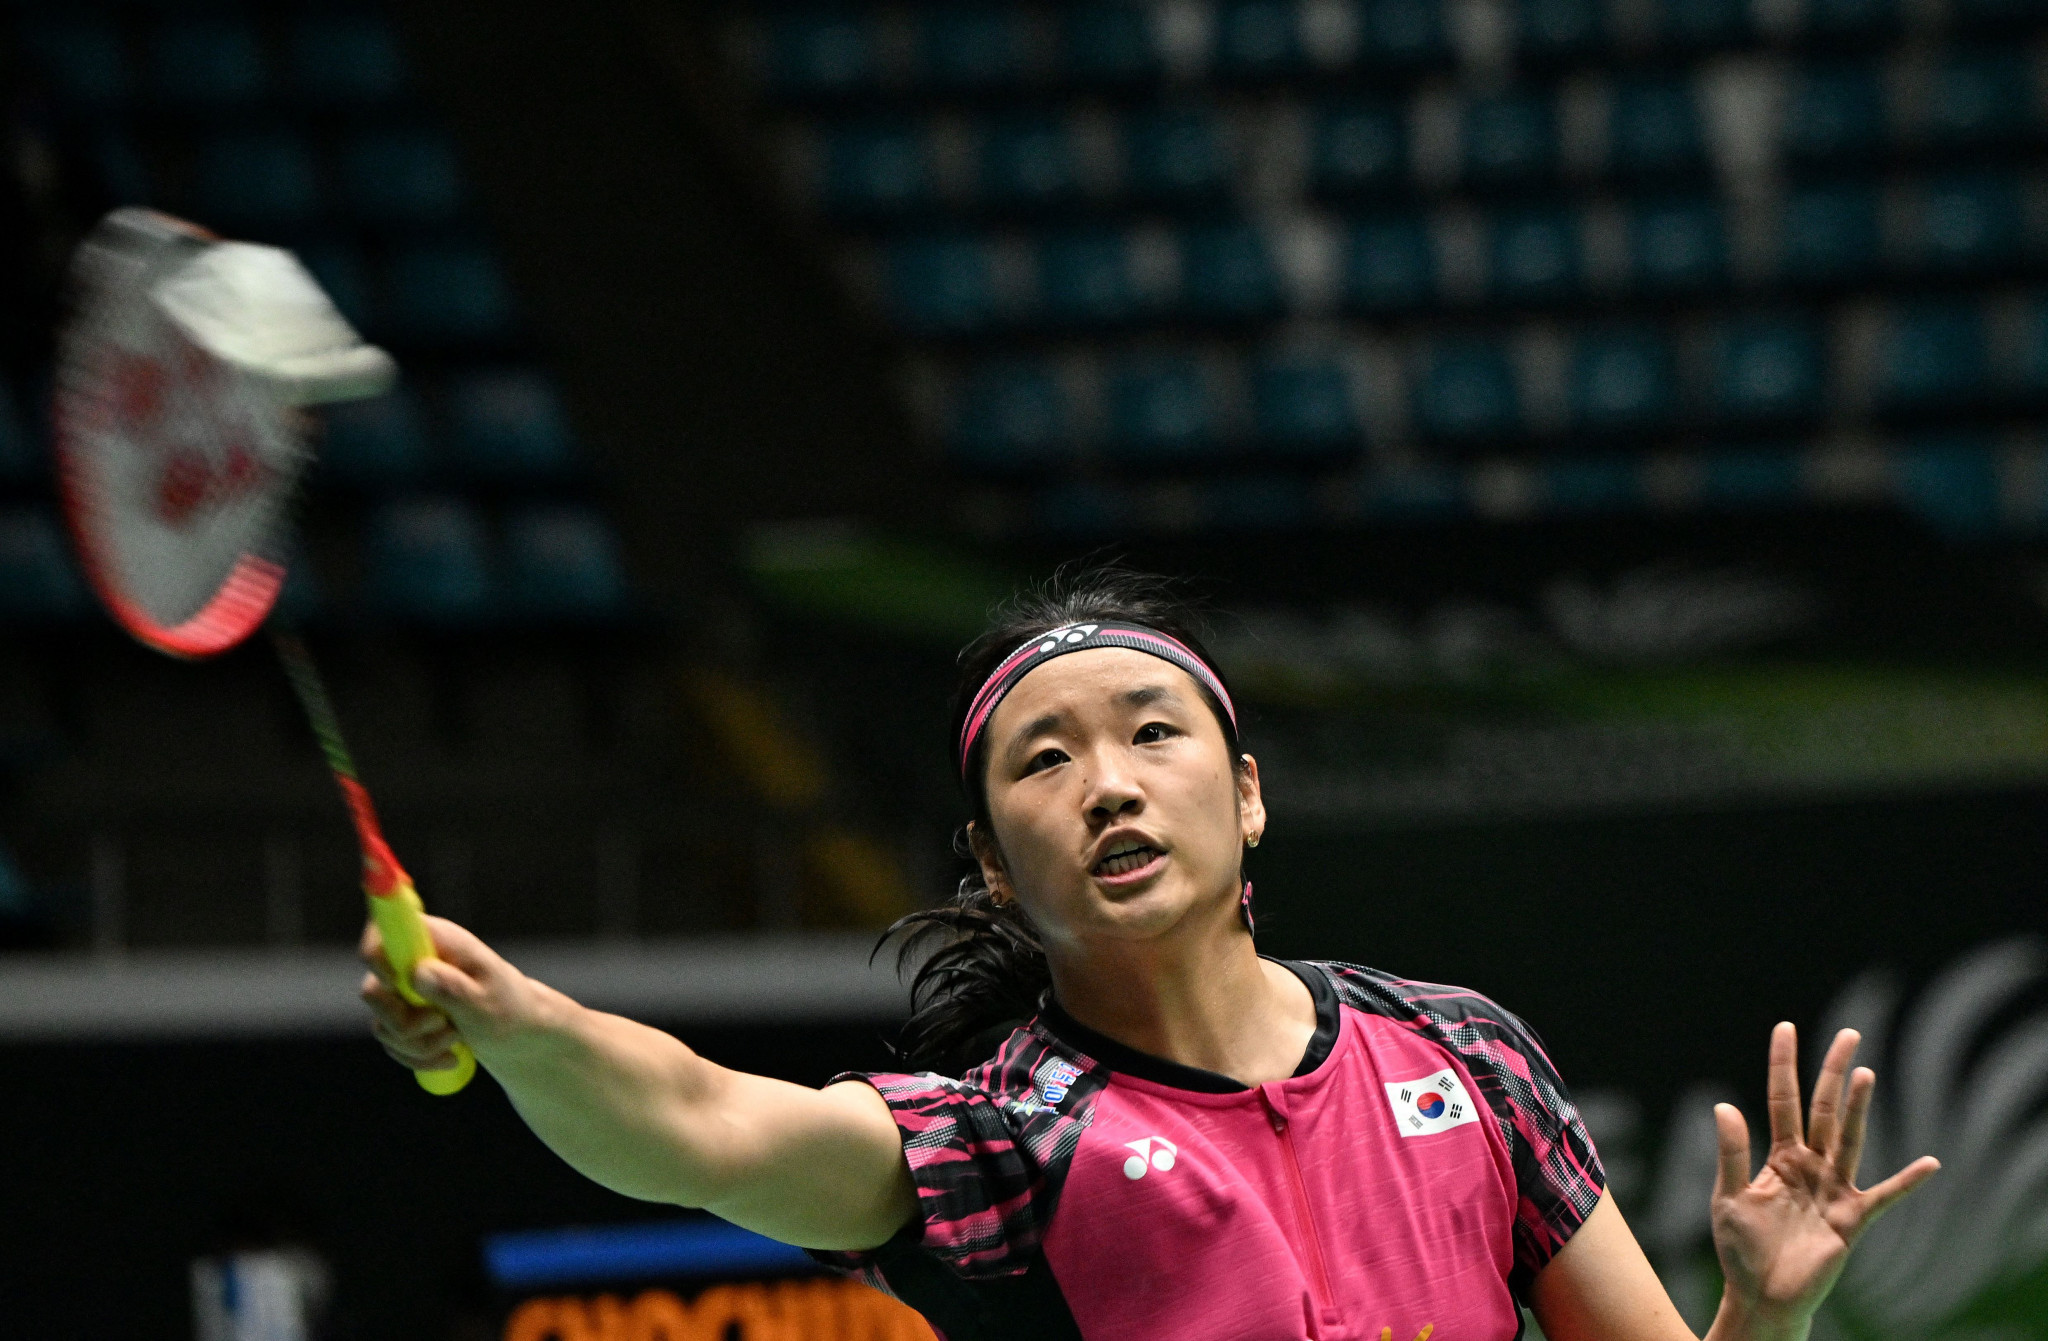 Widjaja progresses through Badminton Asia Championships to set up tie against second seed An